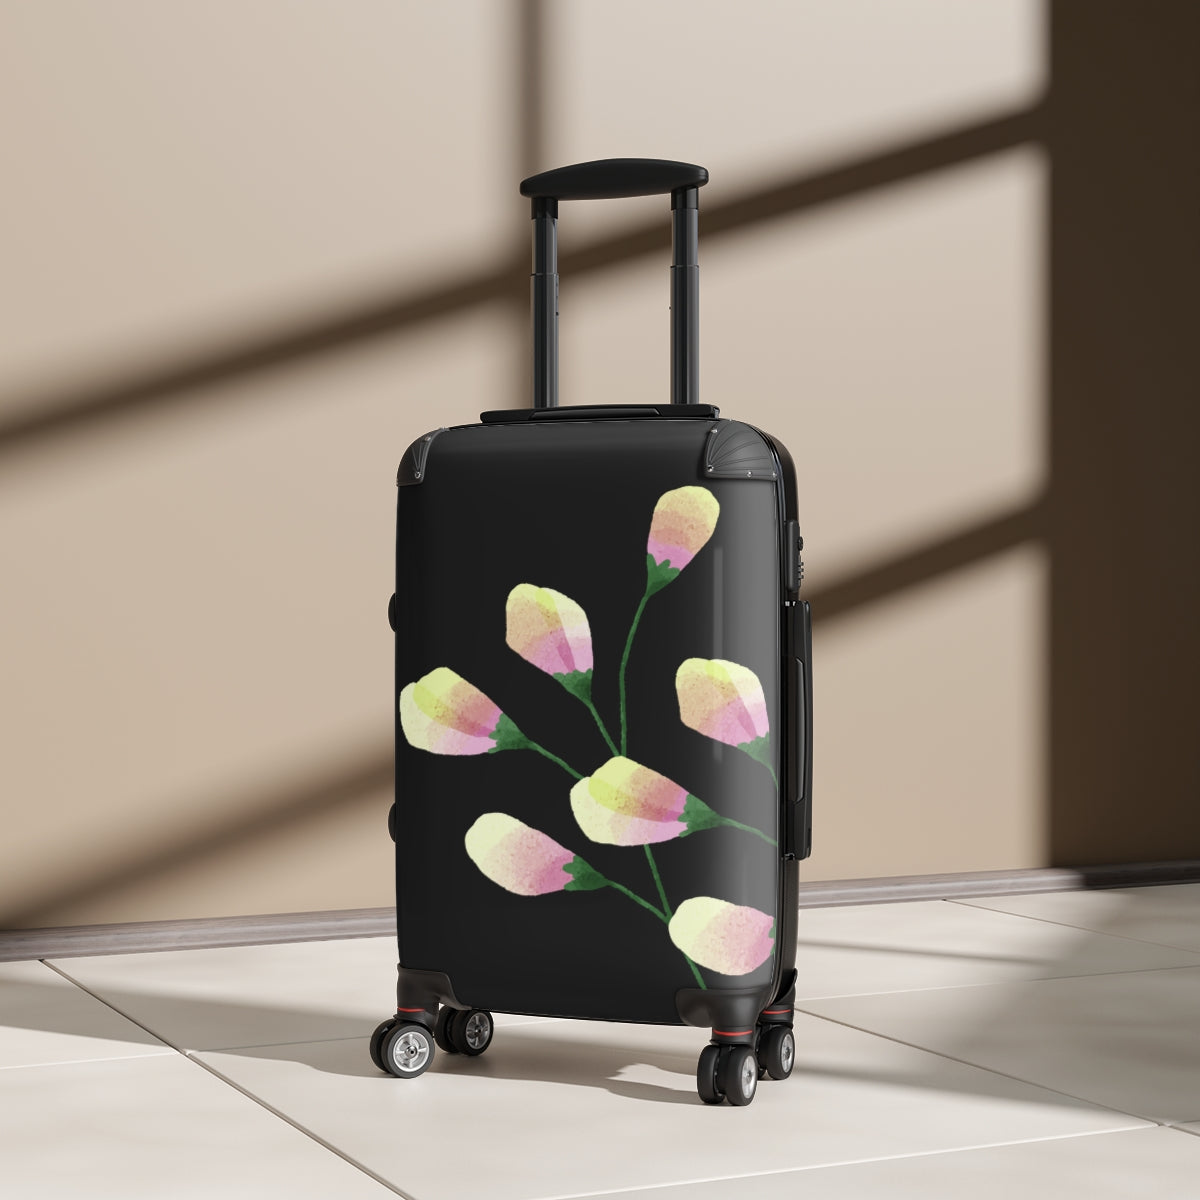 LUGGAGE WITH WHEELS, FLORAL SUITCASES FOR WOMEN,  Cabin Suitcase Carry-On Luggage, Trolly Travel Bags Double Wheeled Spinners